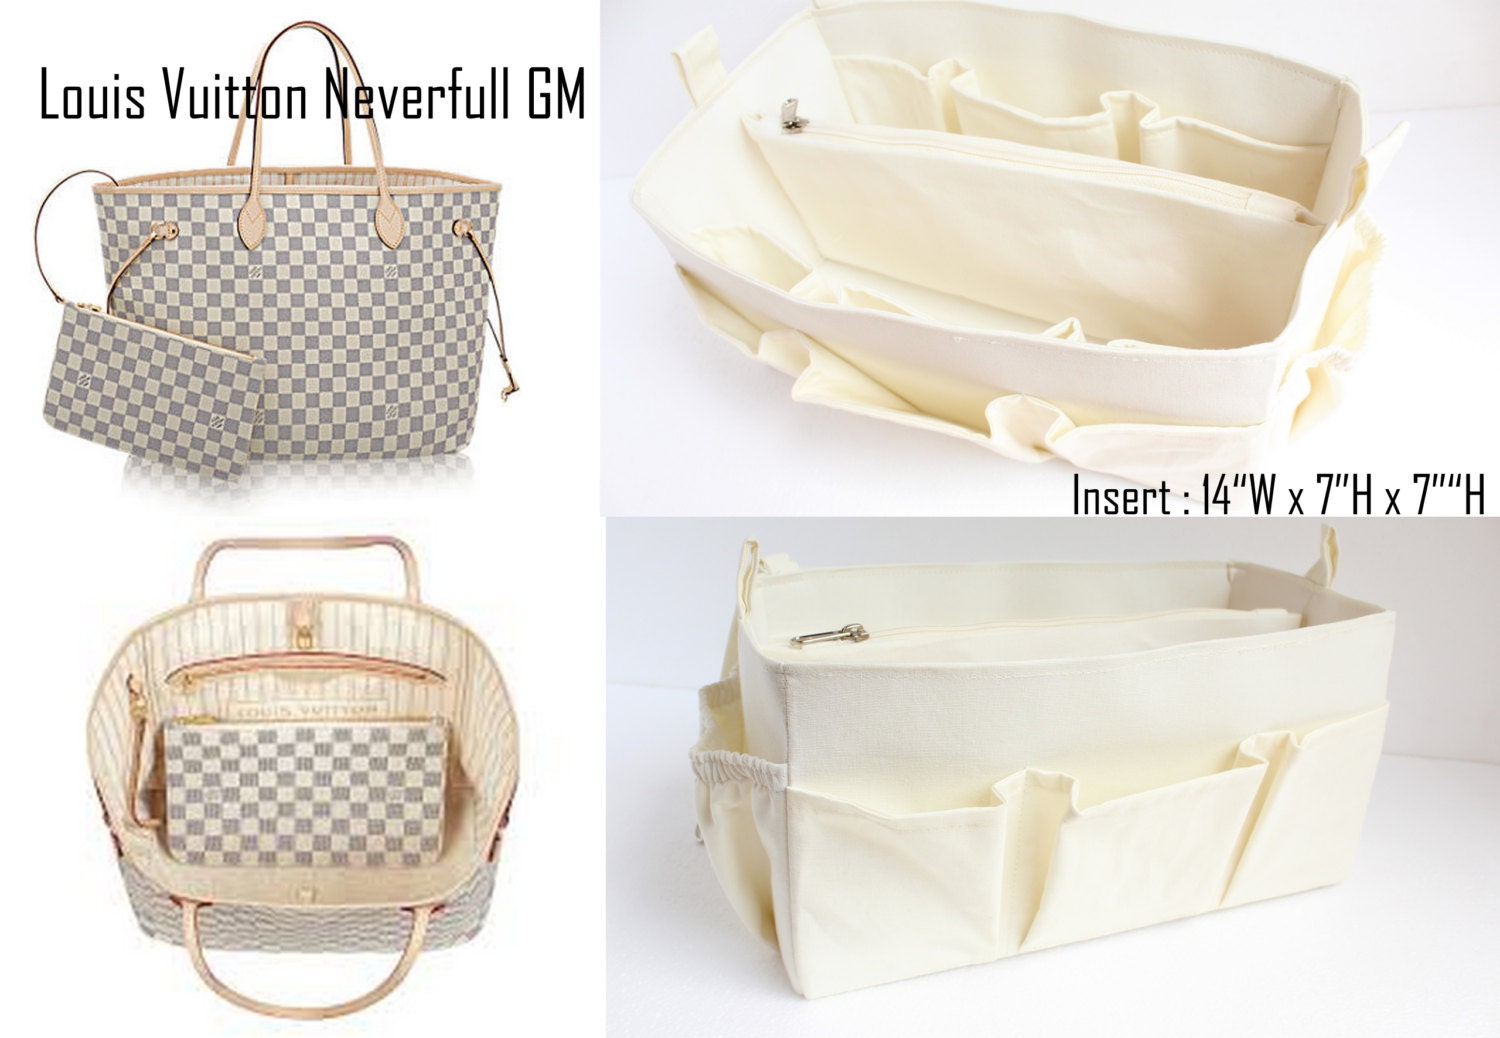 How To Clean Louis Vuitton Neverfull Gm Tote | Confederated Tribes of the Umatilla Indian ...